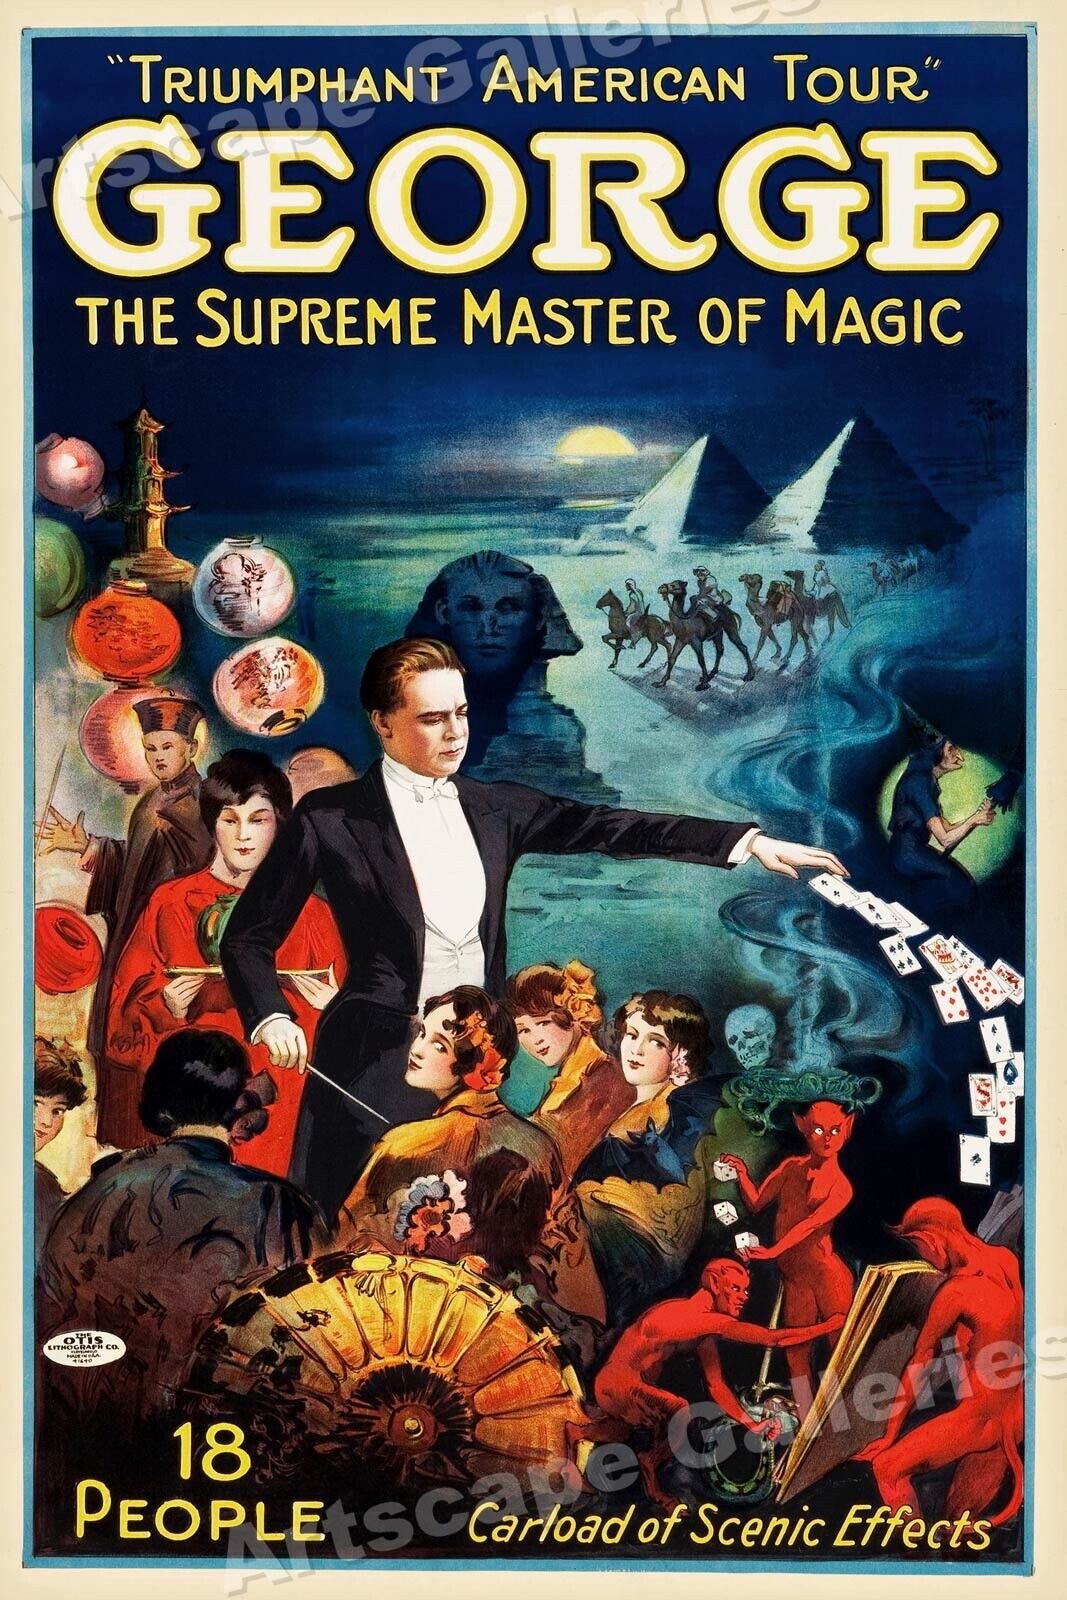 George - Master of Magic 1920s Vintage Style Magic Poster - 24x36